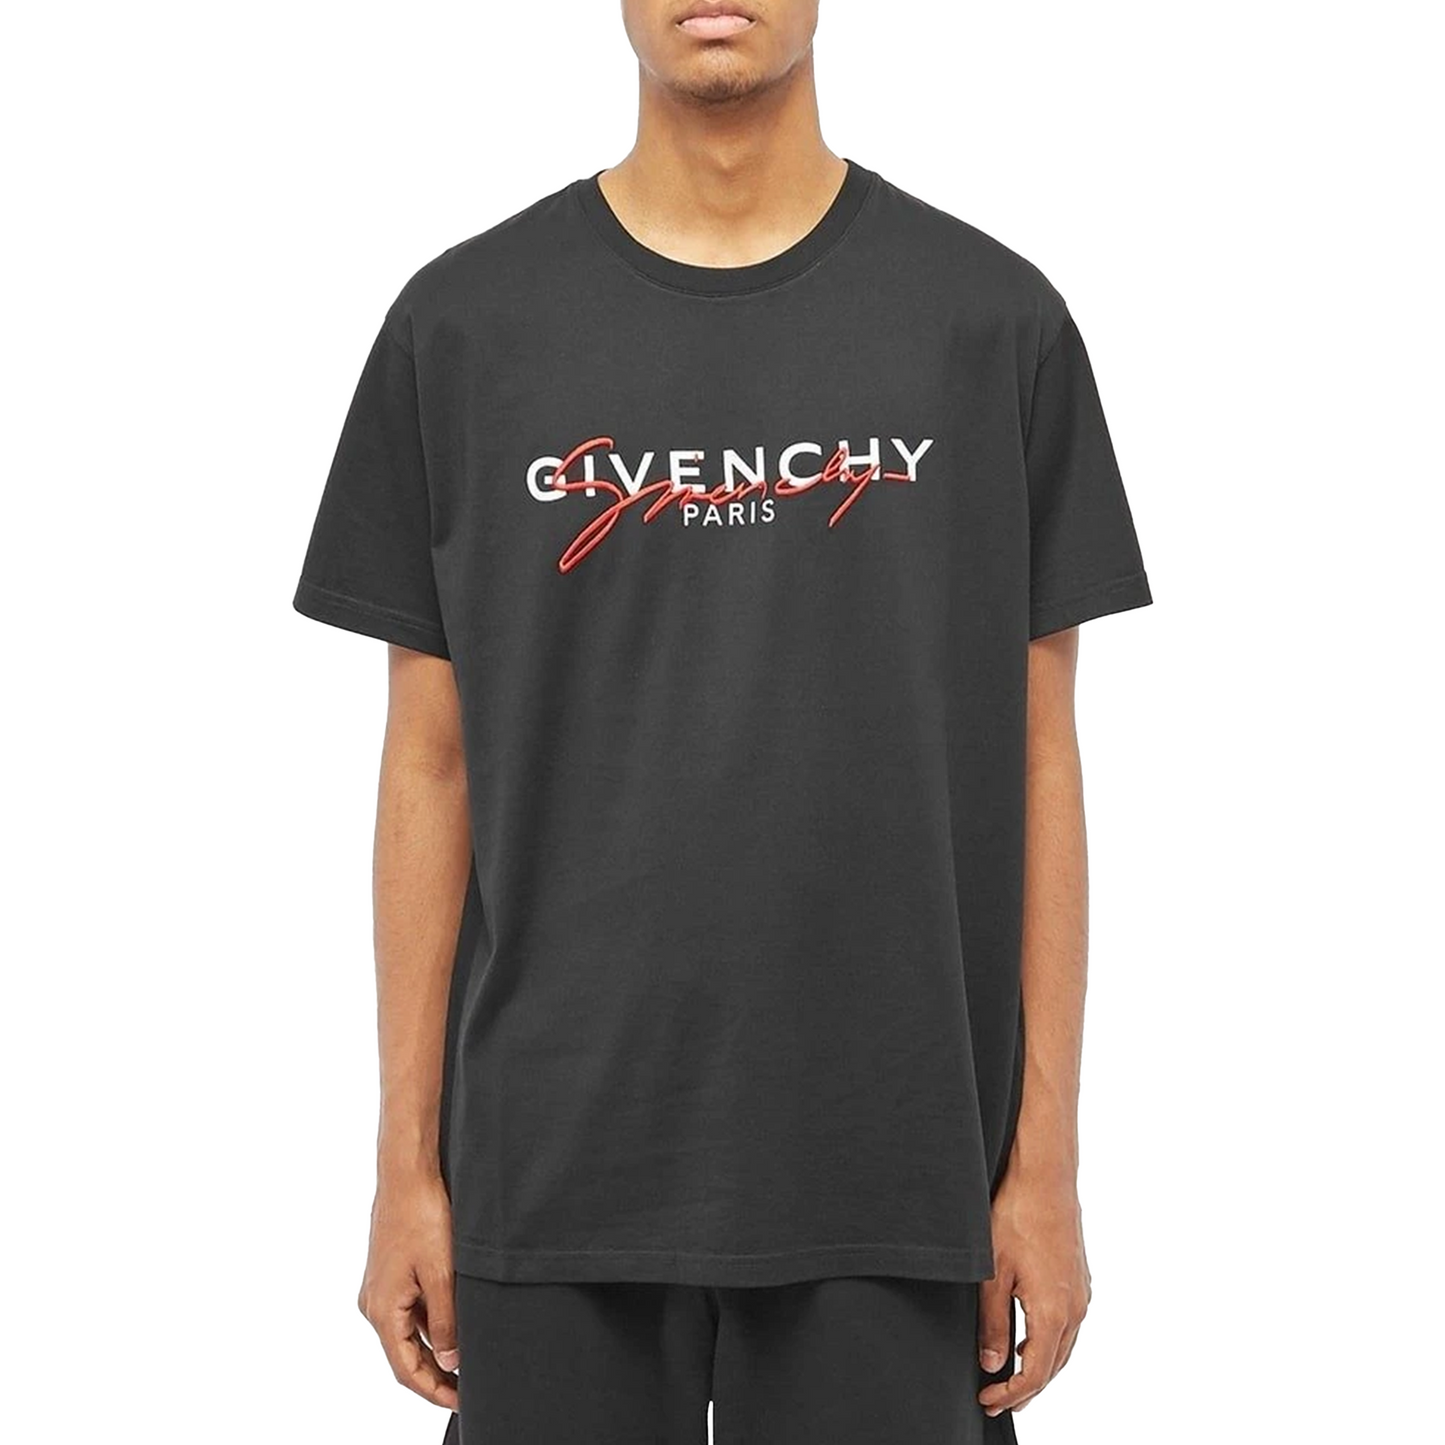 Givenchy Signature Logo Tee Black/Red (Regular Fit)